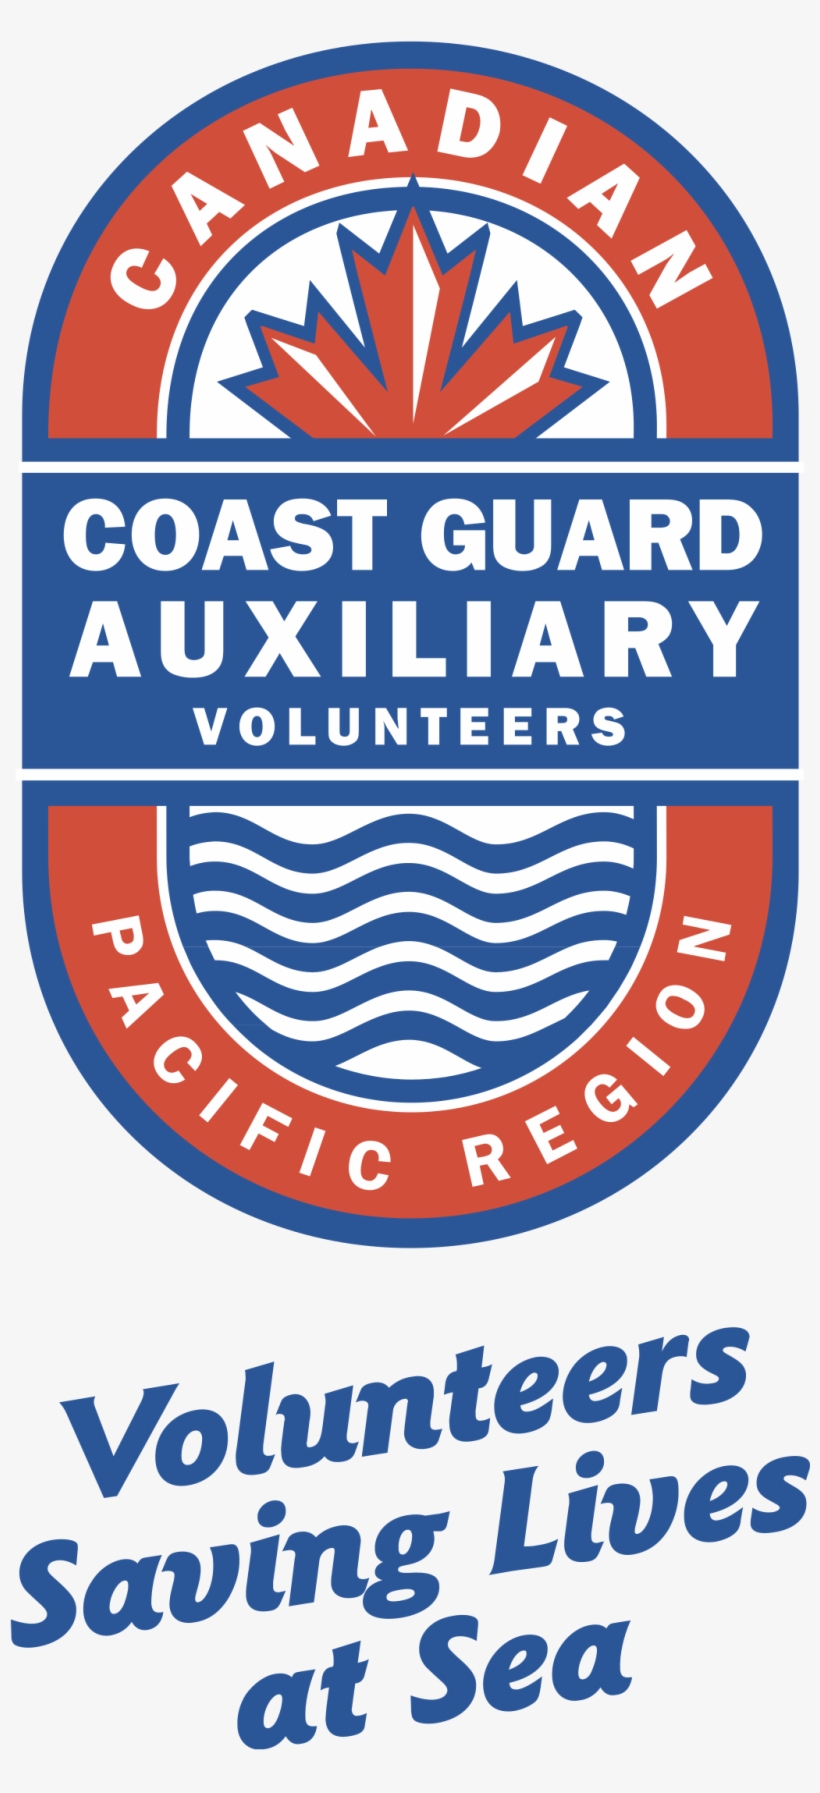 Canadian Coast Guard Auxiliary Logo Png Transparent - Canadian Coast Guard Auxiliary, transparent png #445826